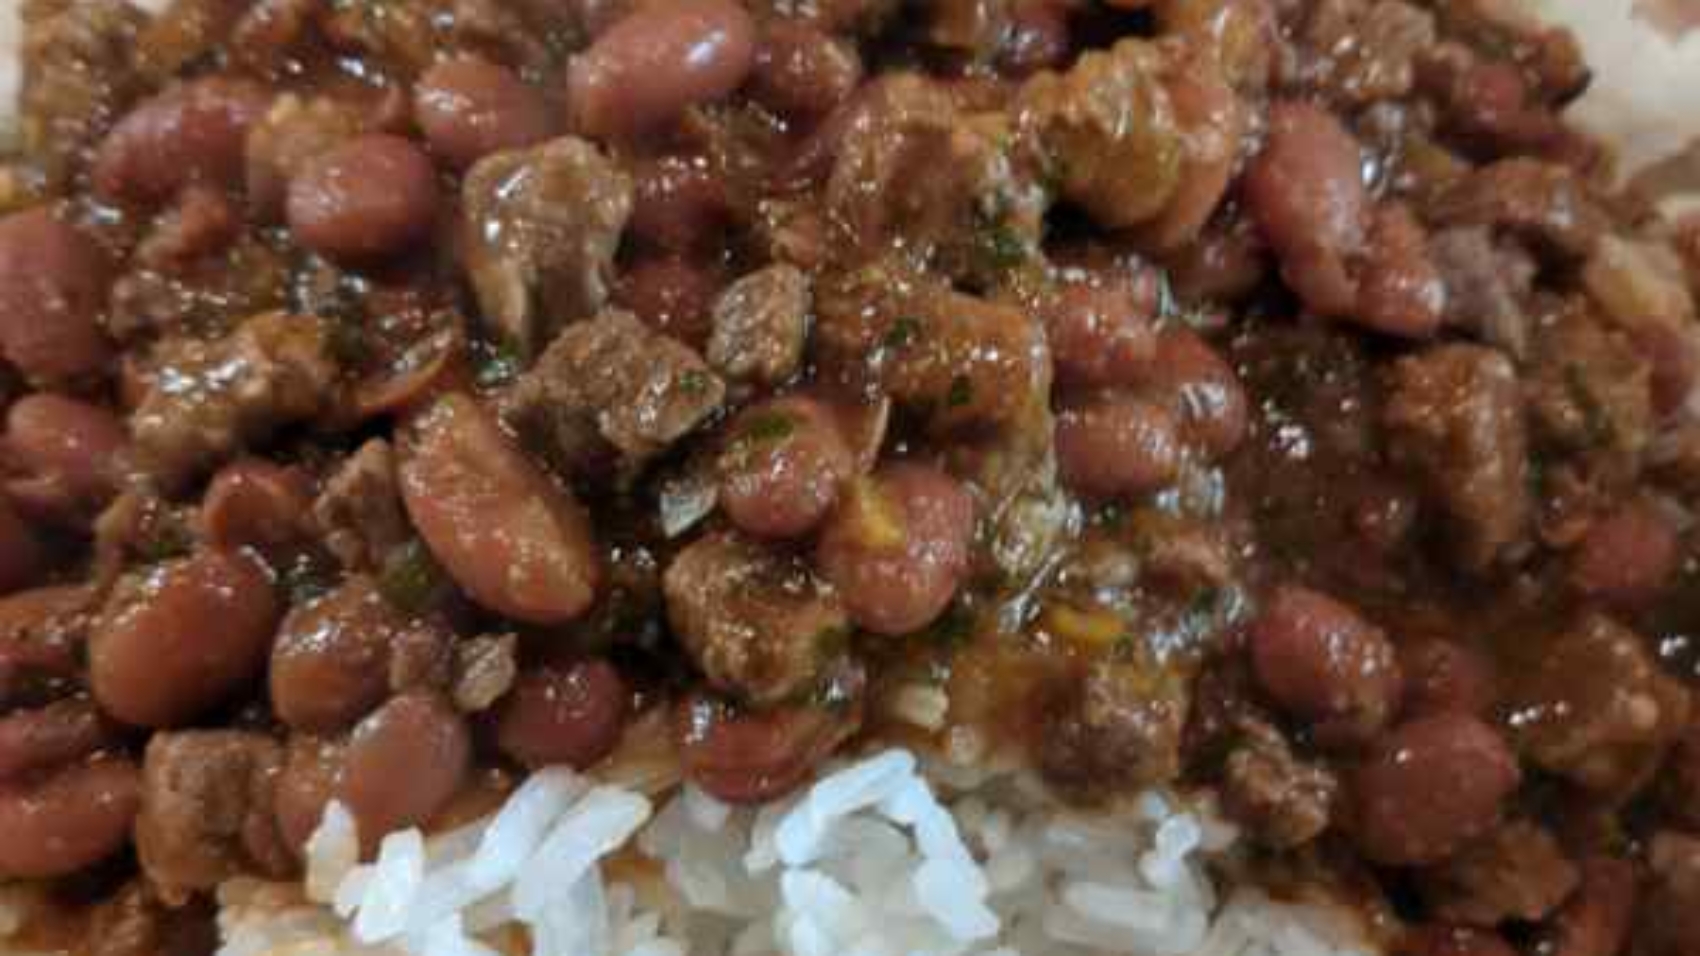 Puerto rican rice and beans w steak opt